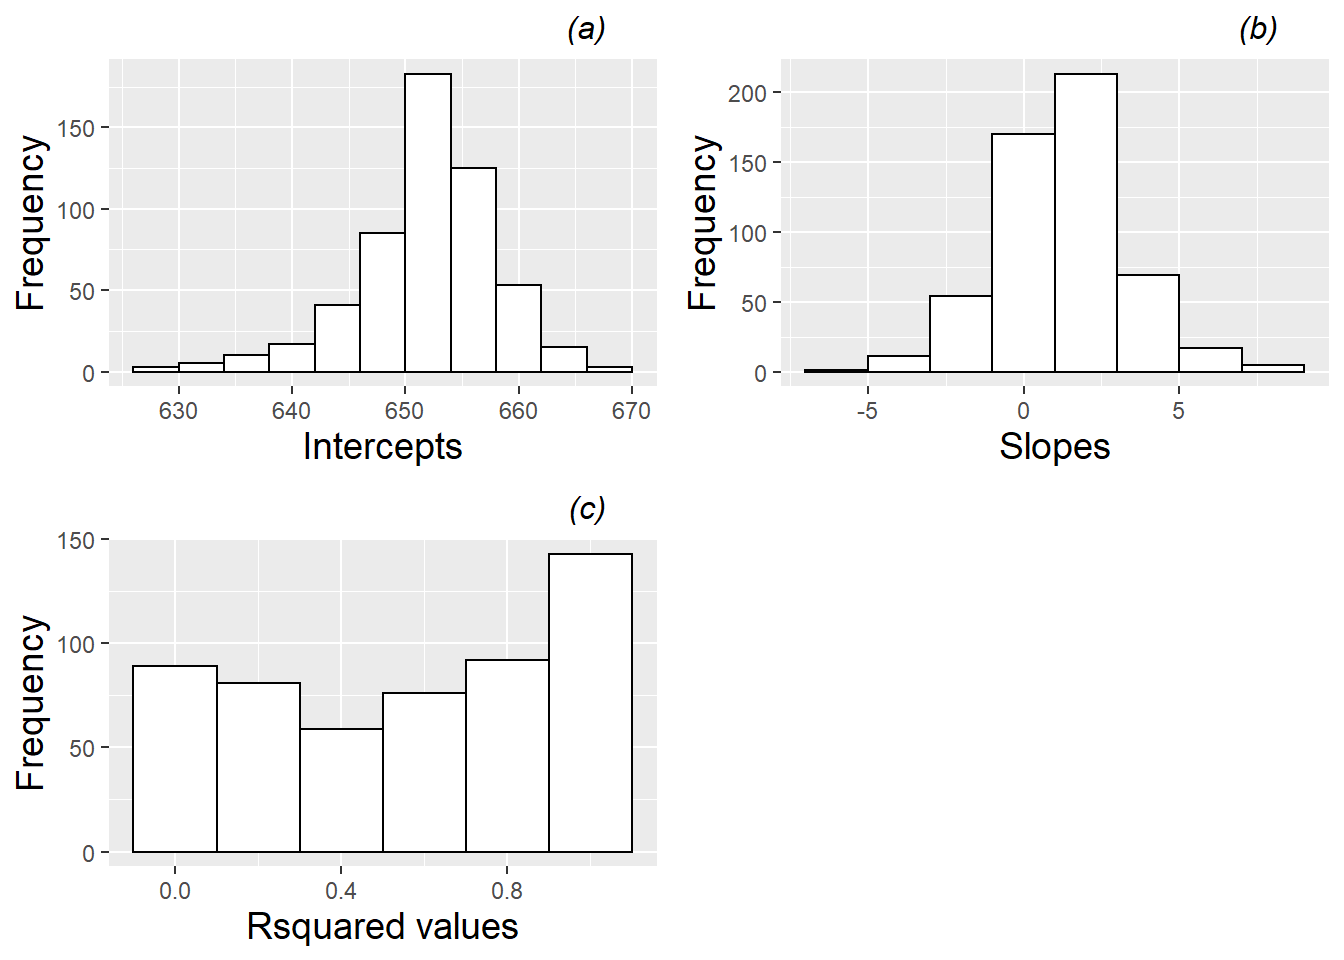  Histograms for (a) intercepts, (b) slopes, and (c) R-squared values from fitted regression lines by school.